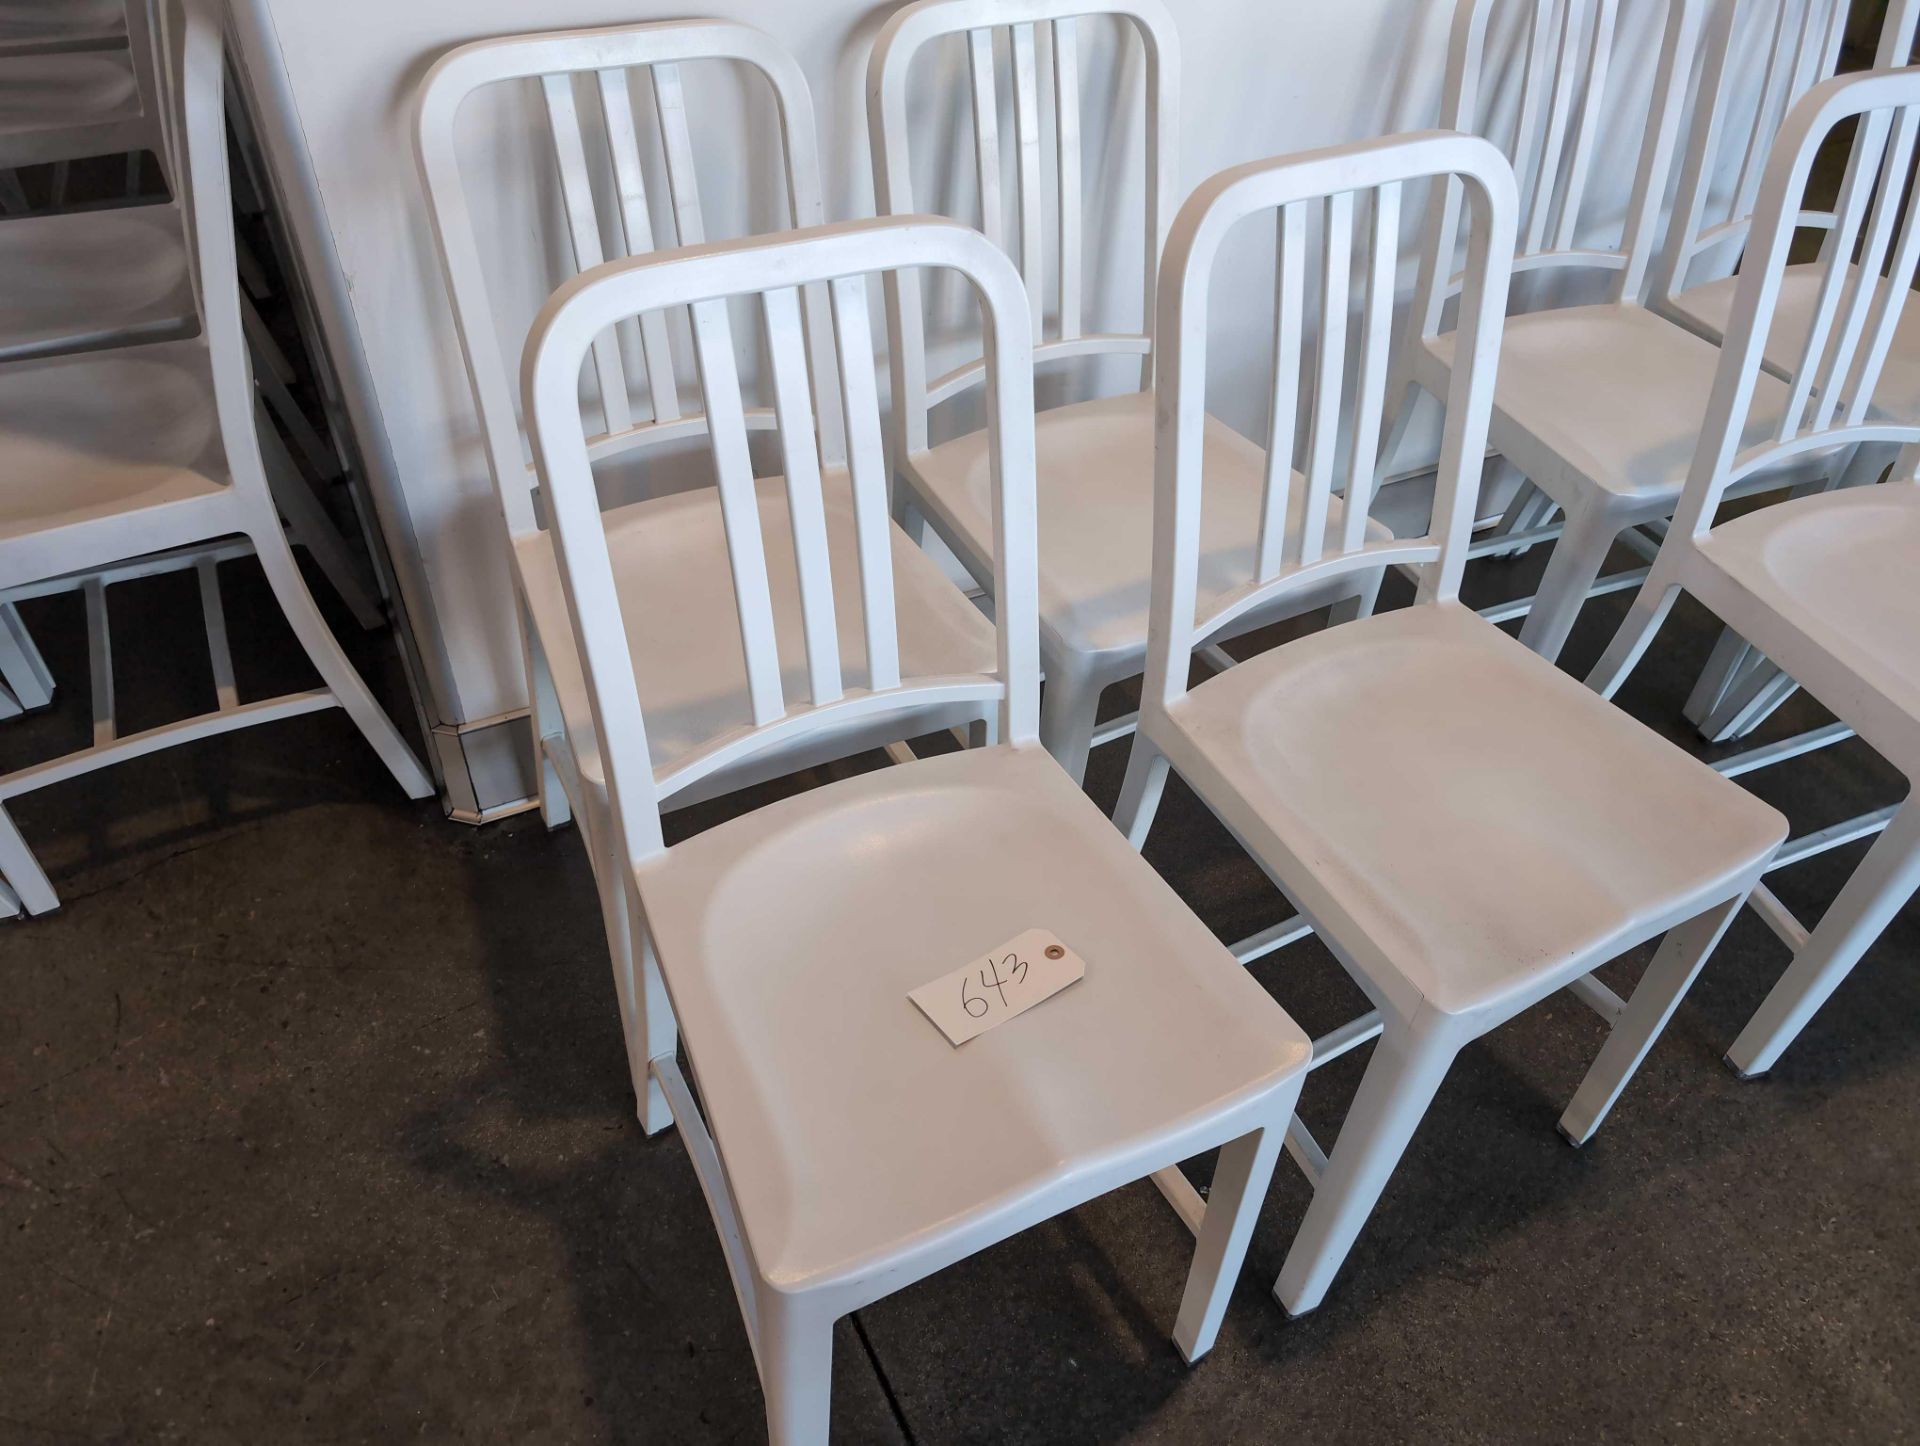 (4) 111 Emeco Navy Chairs made of recycled coke bottles - Image 2 of 5